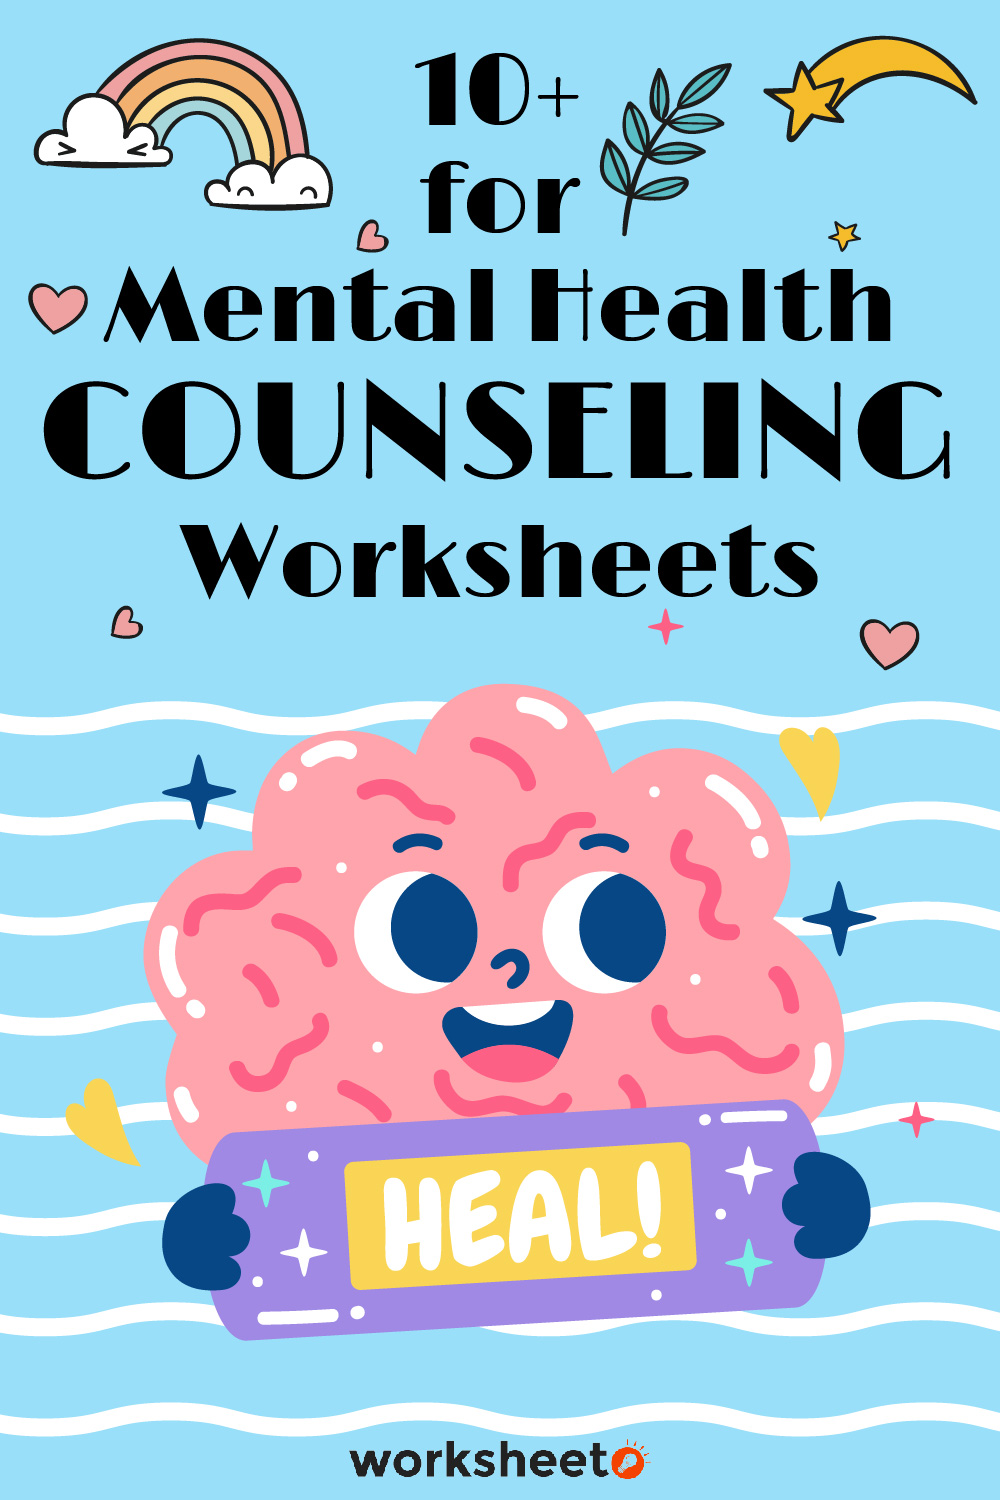 20 Images of For Mental Health Counseling Worksheets